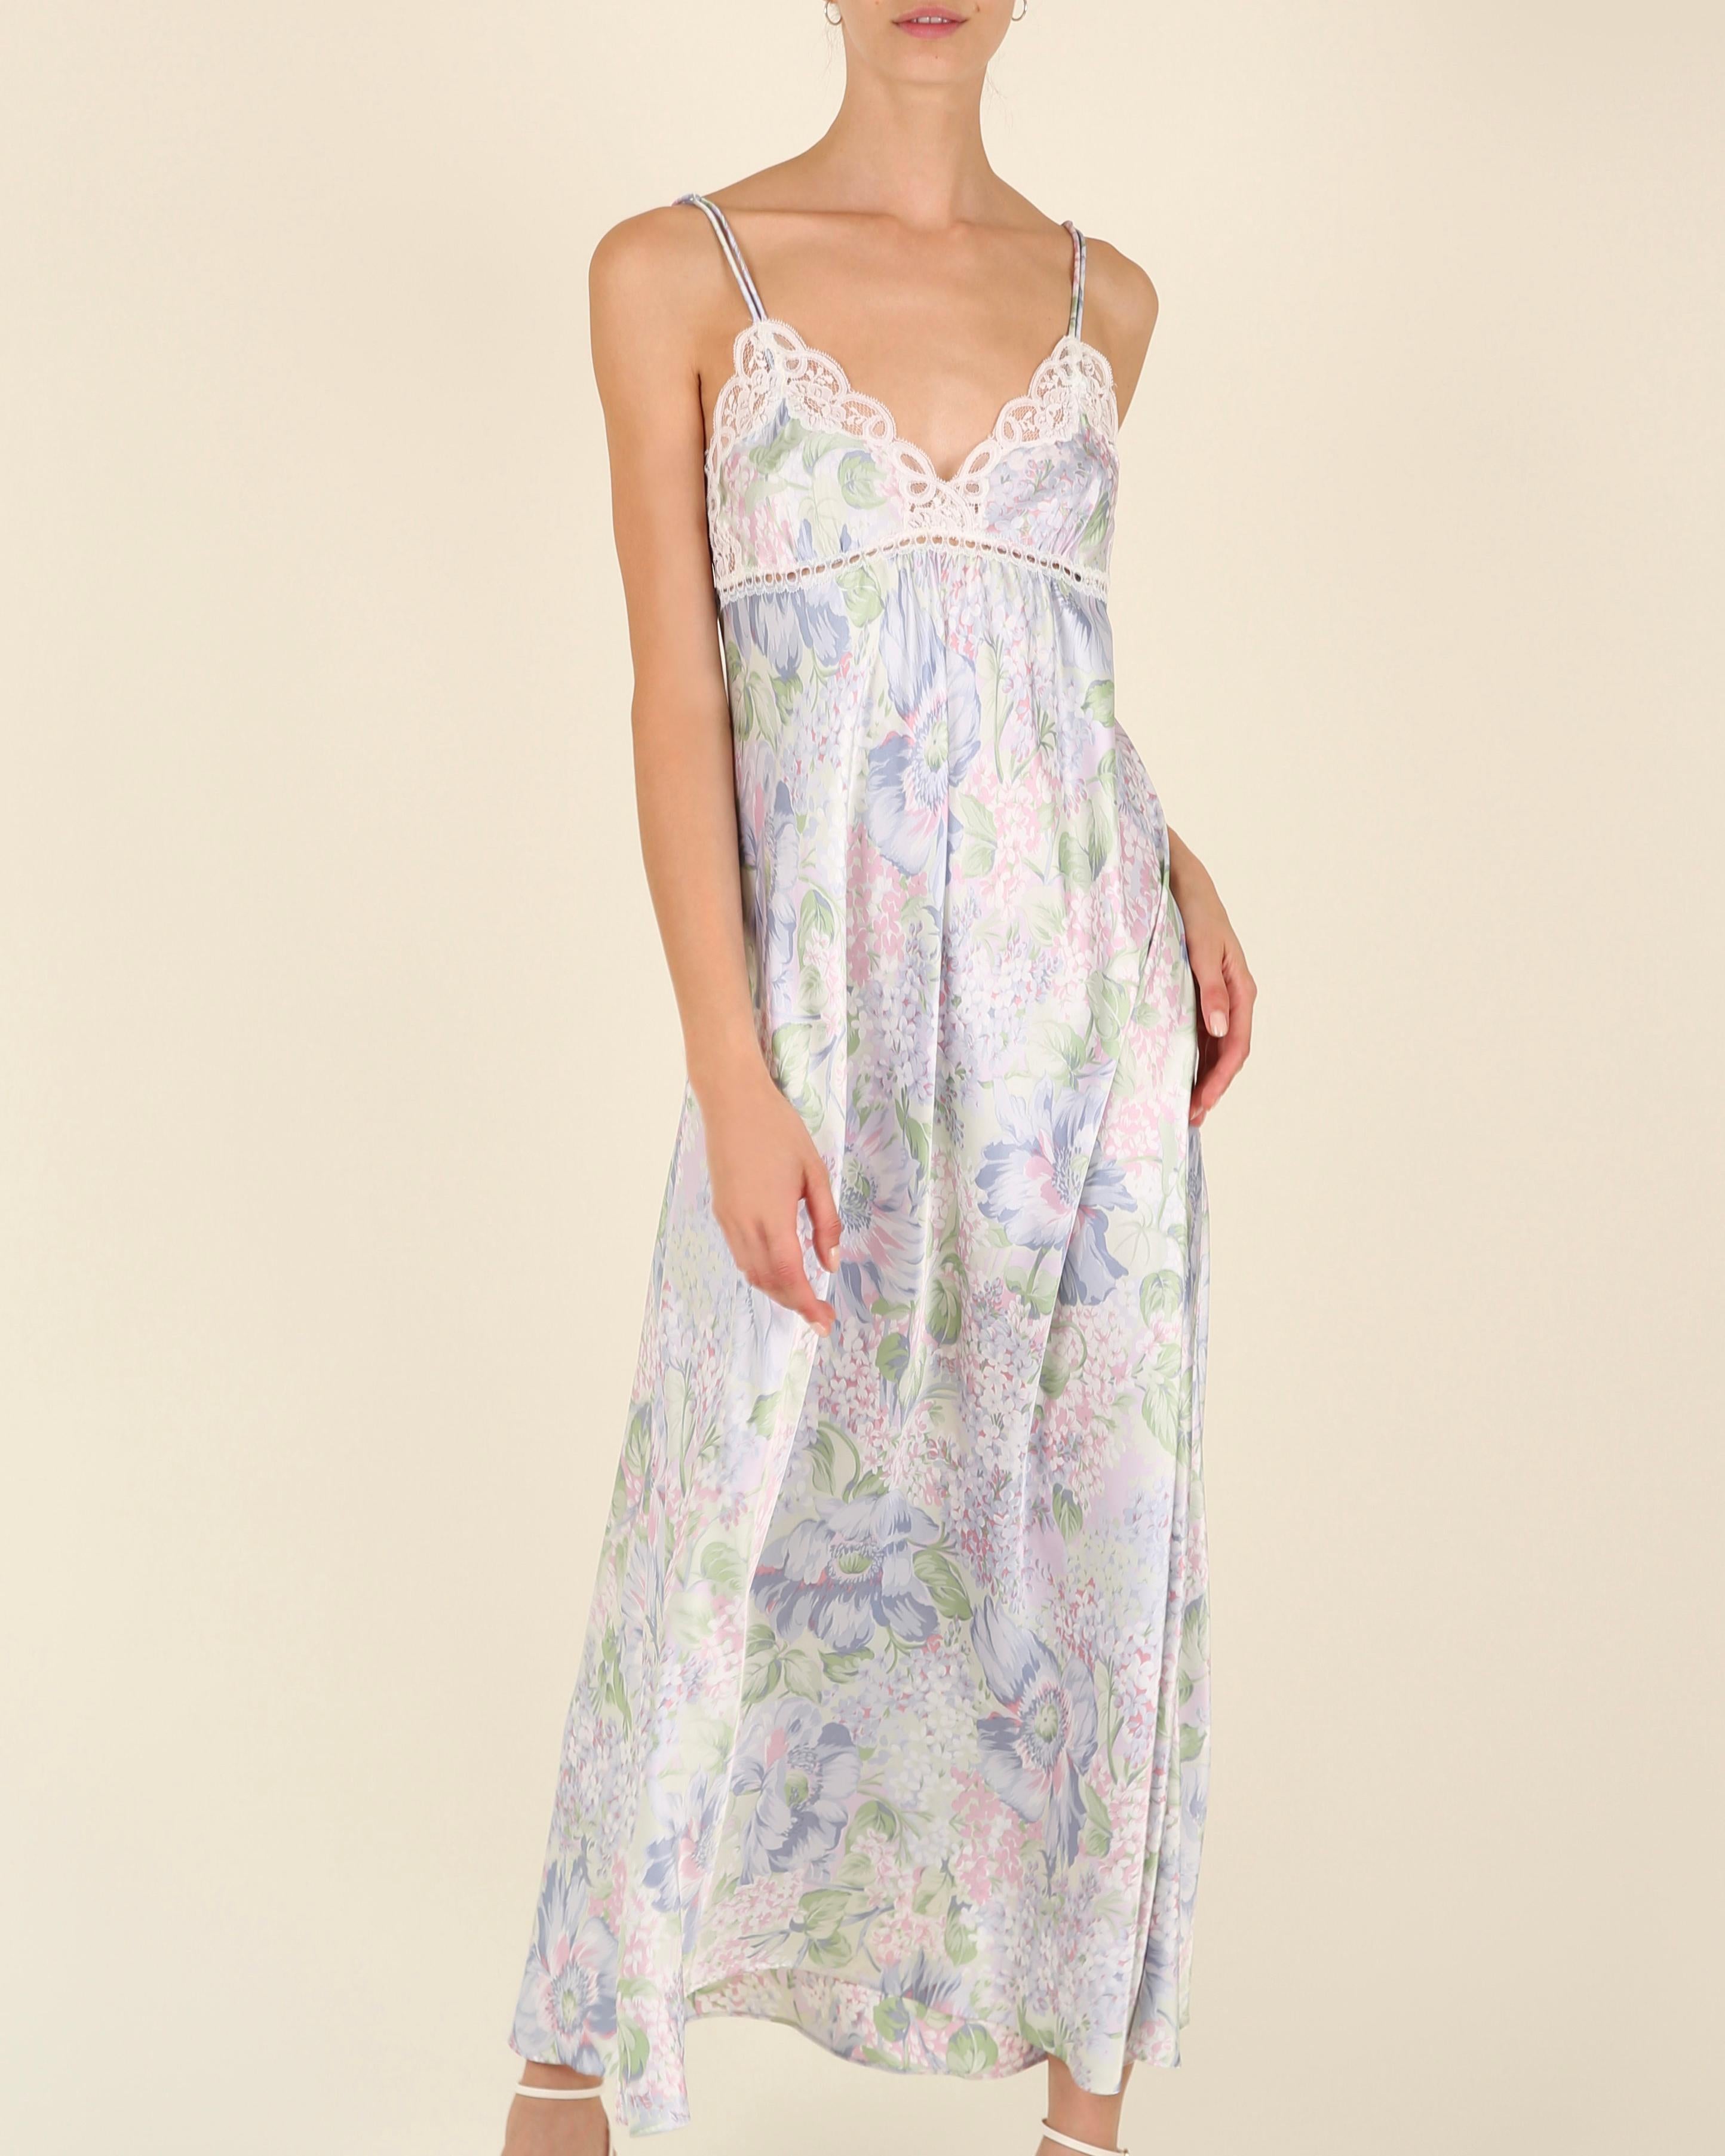 Women's Christian Dior vintage silky lilac floral print lace night gown slip maxi dress For Sale